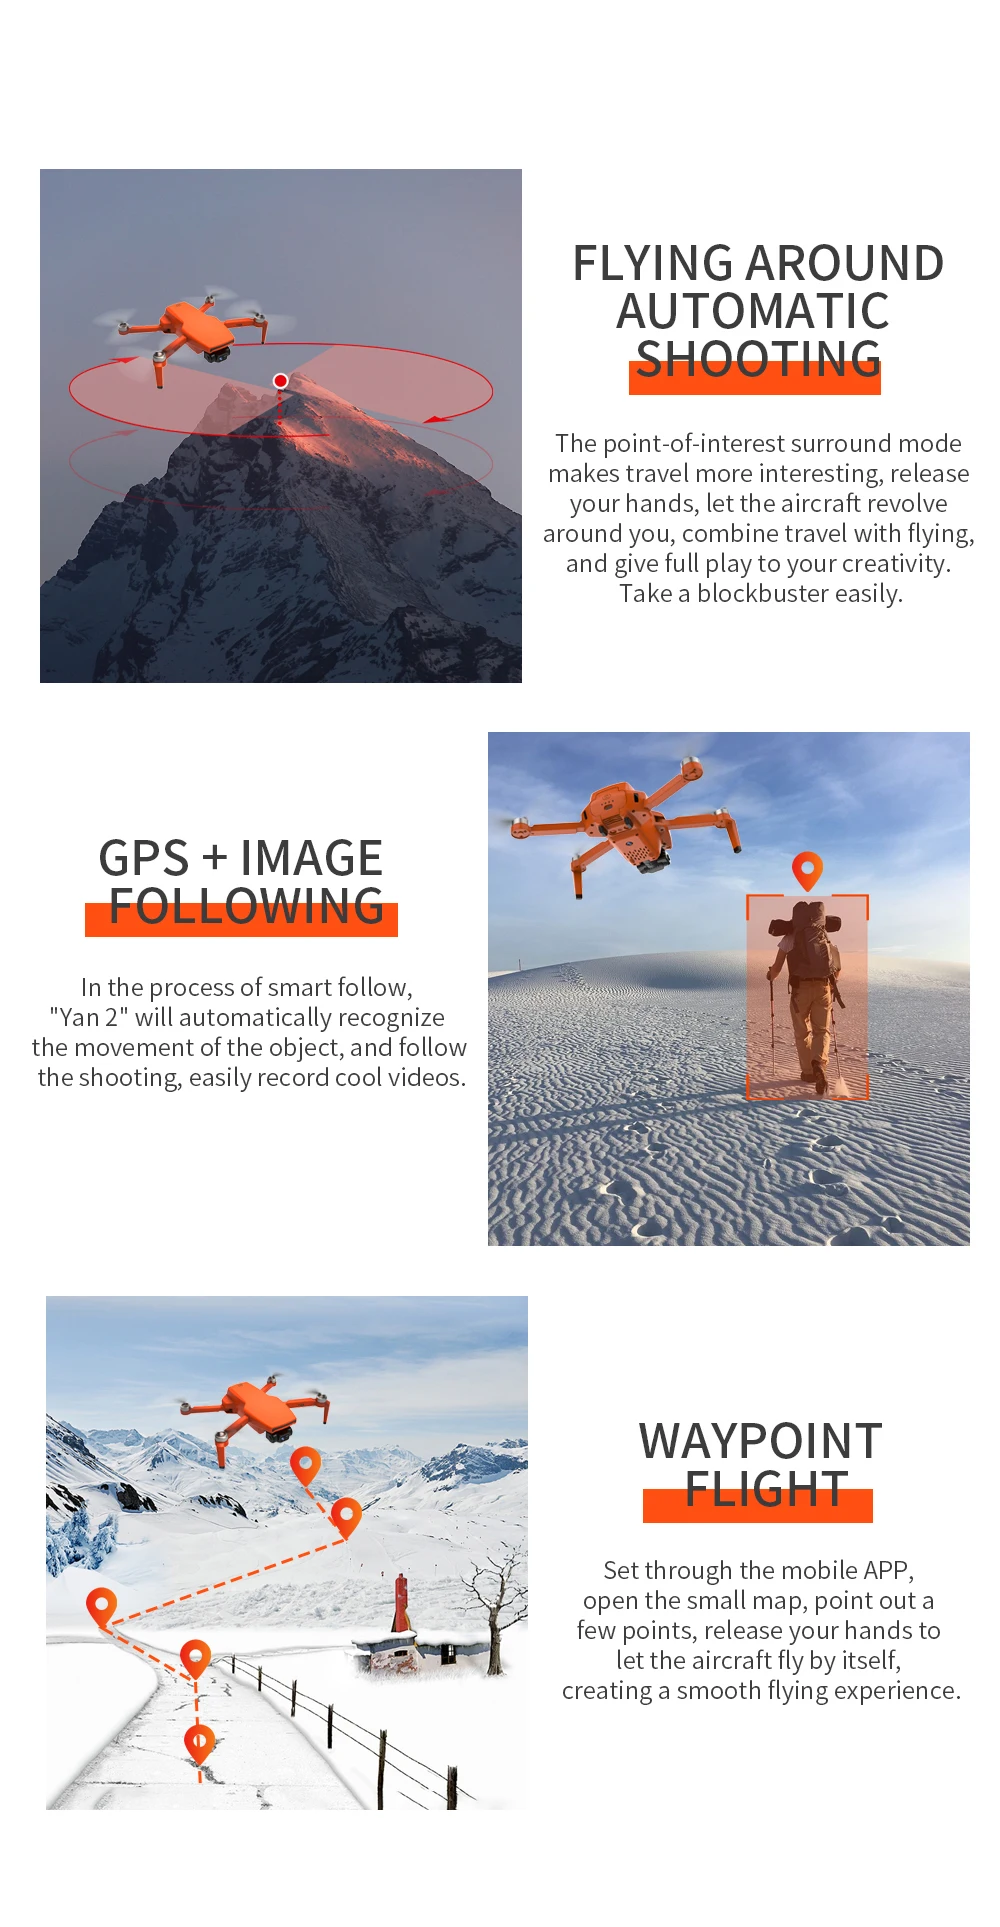 G108 Pro MAx Drone, "yan 2" is a point-of-interest travel app that lets you follow